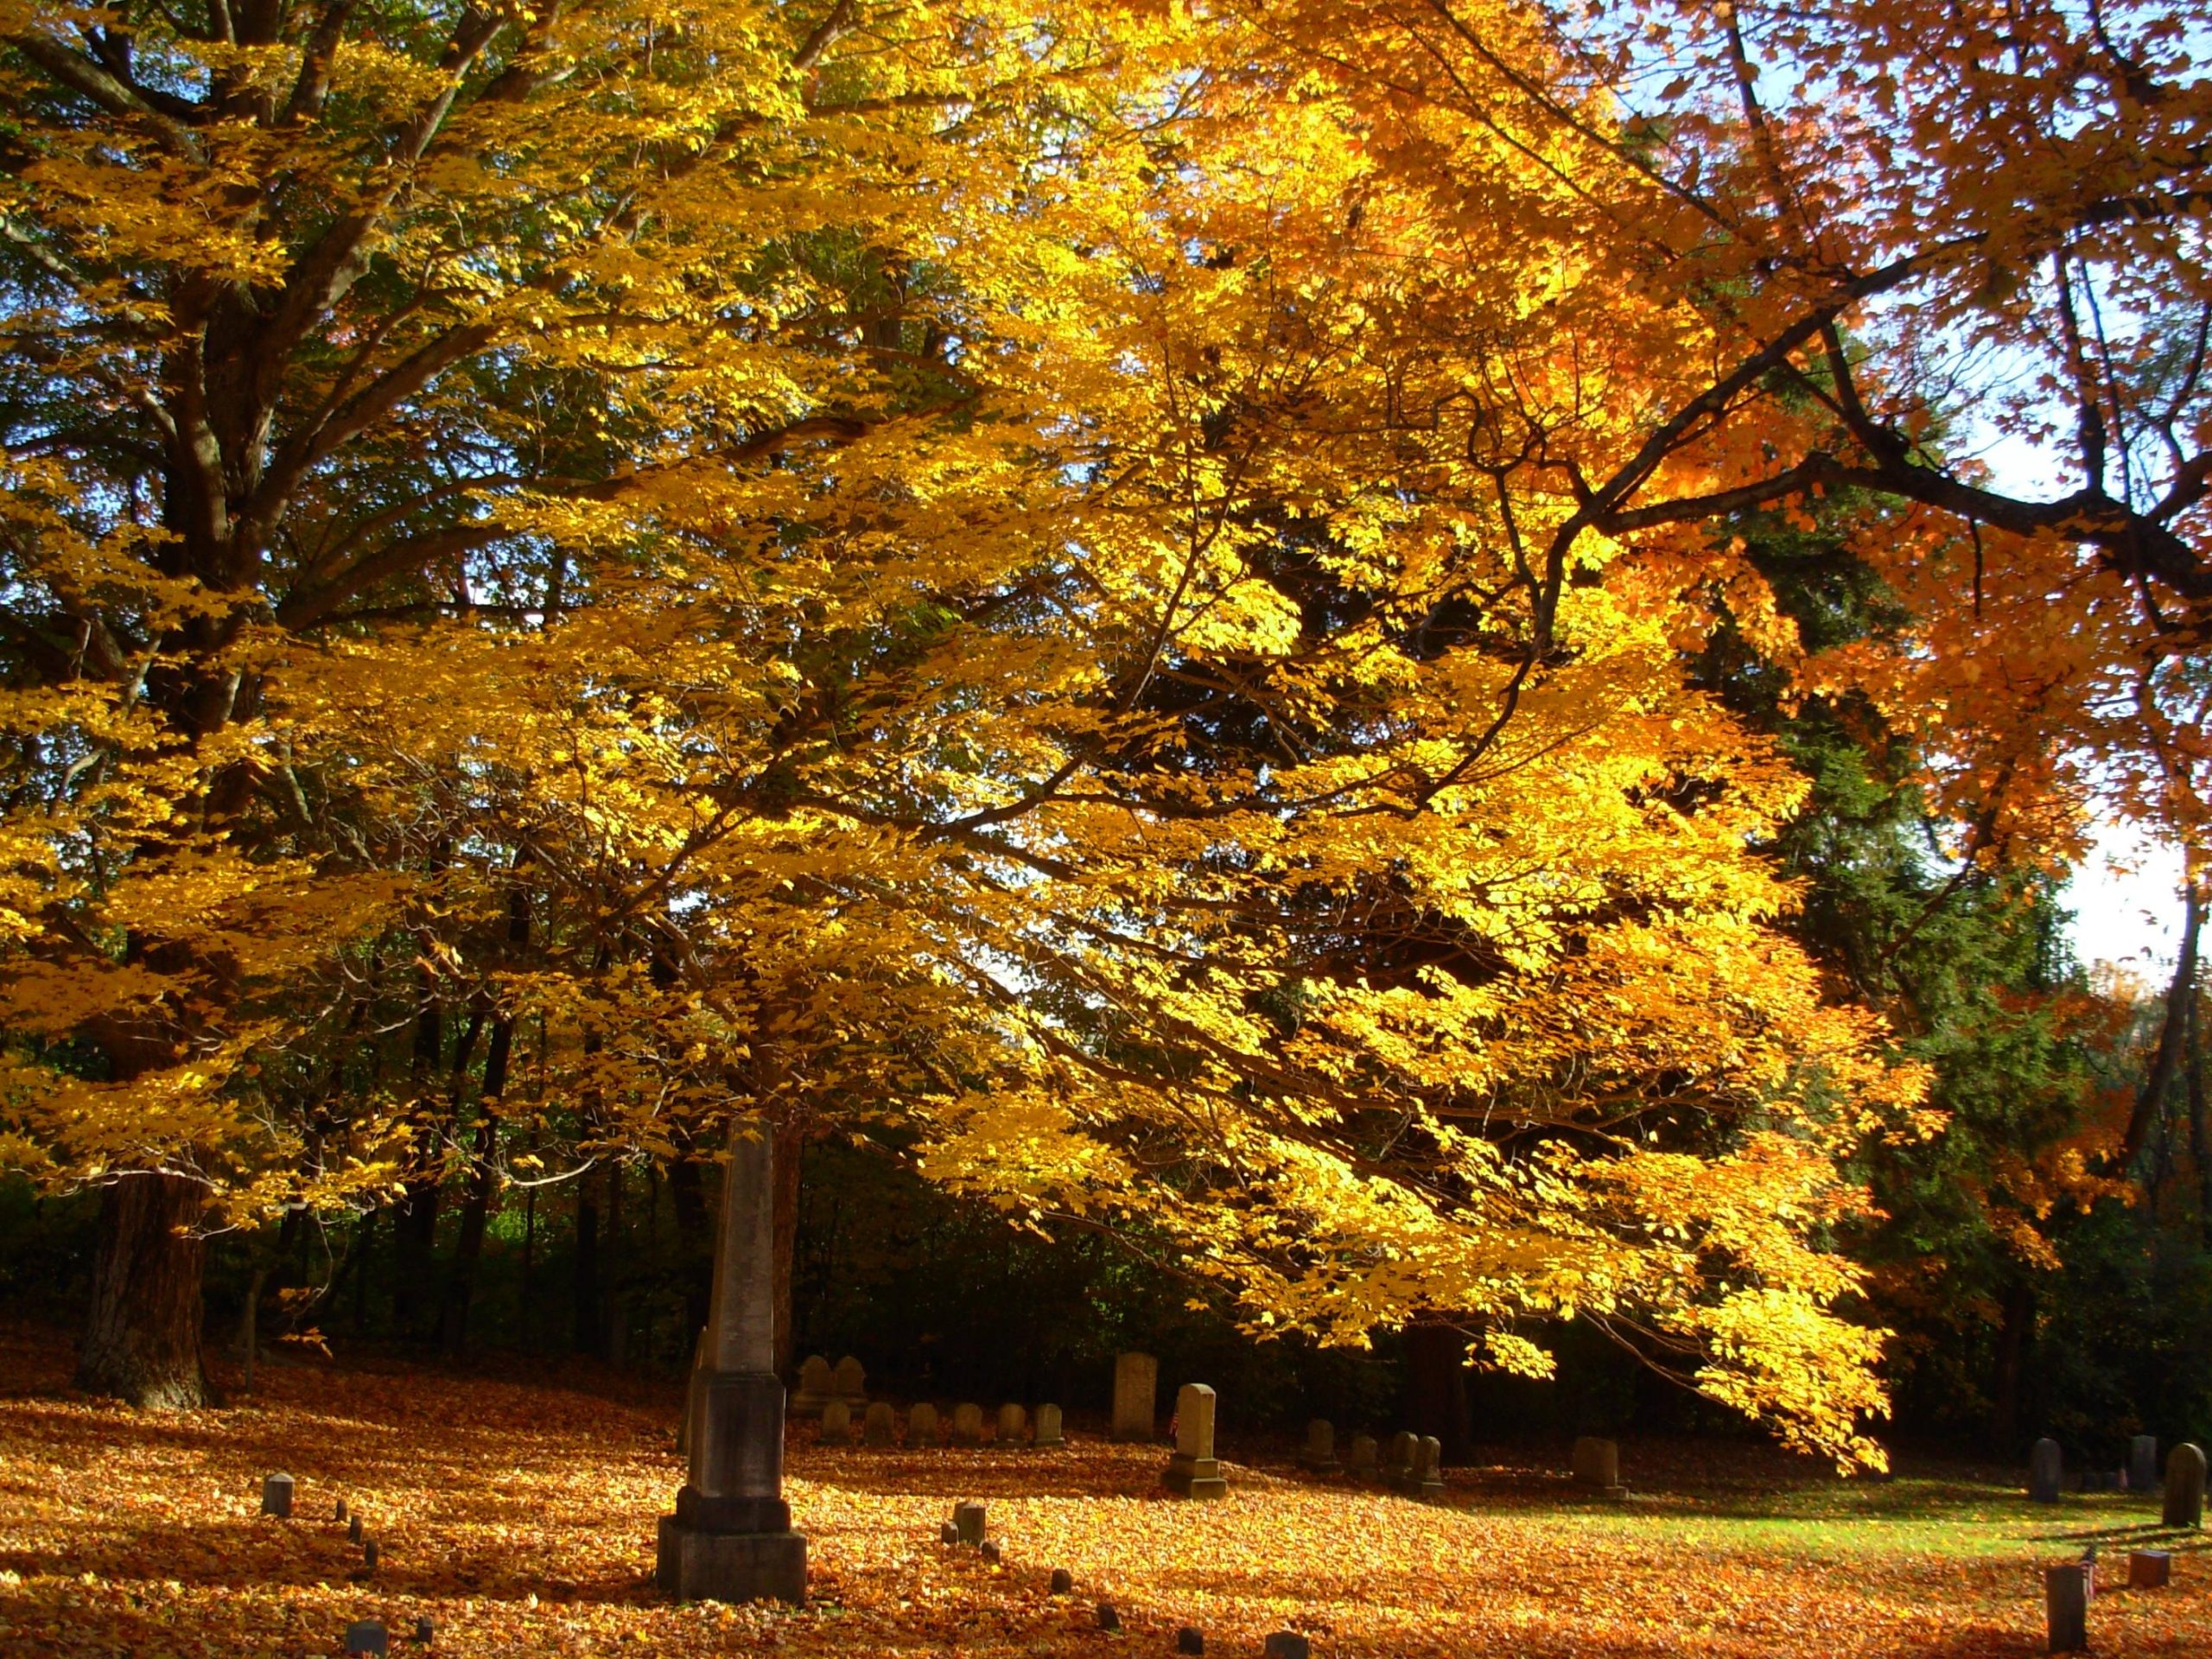 Foliage in Massachusetts (user submitted)